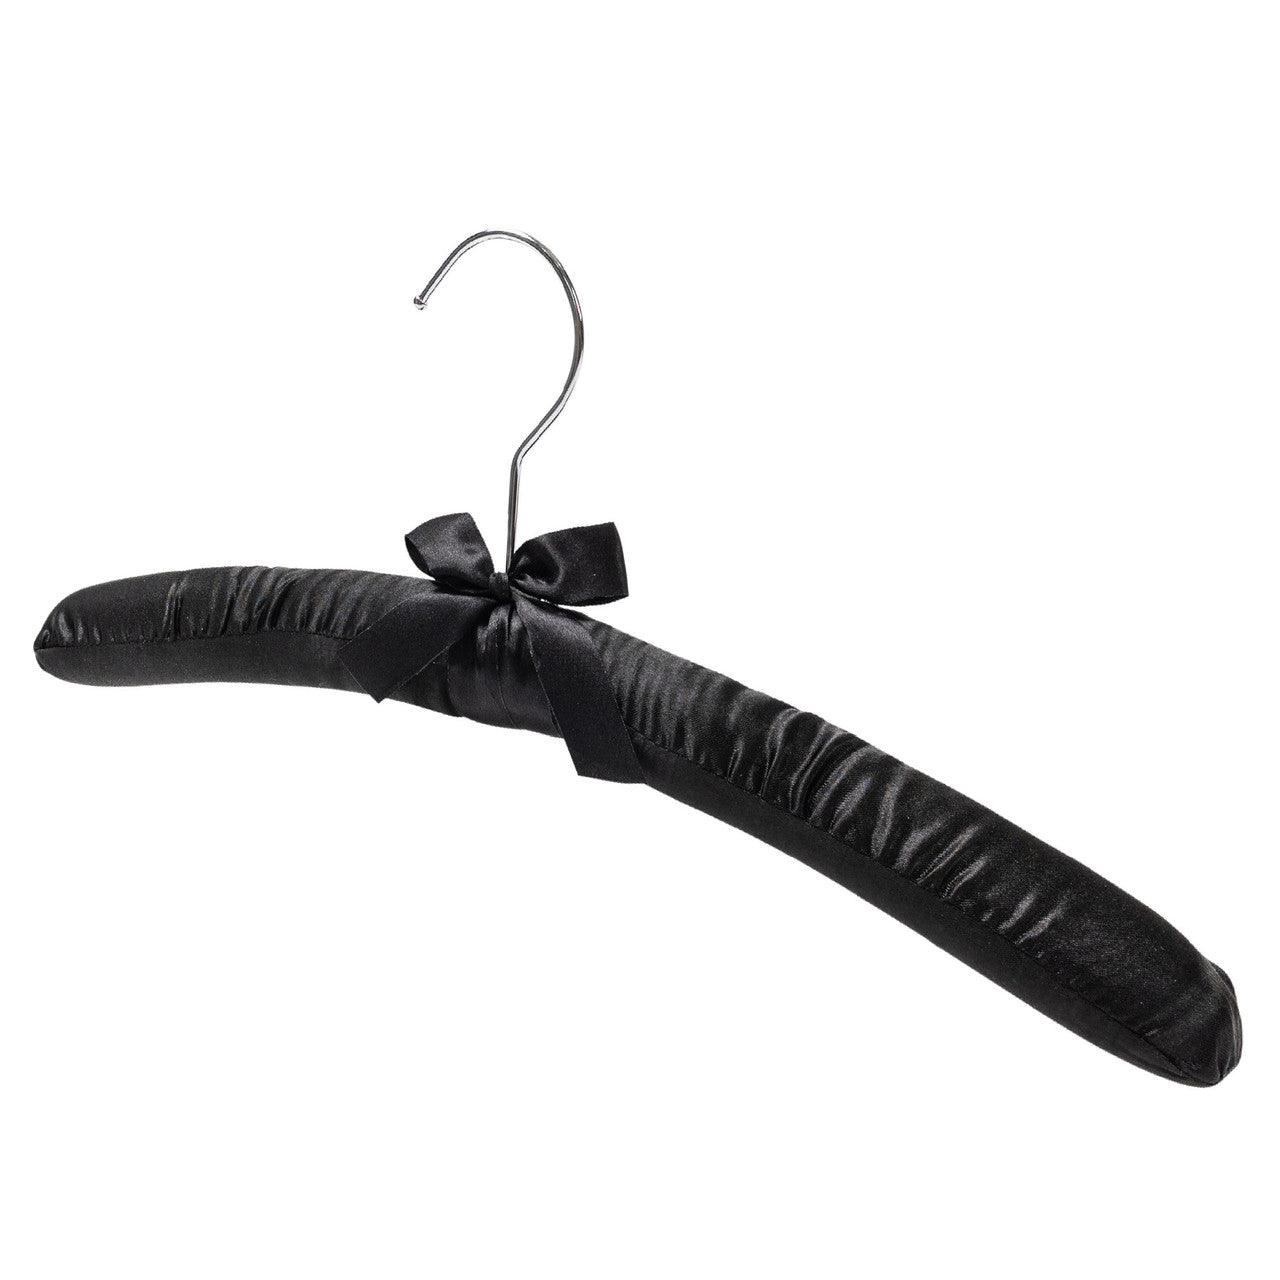 Padded coat hangers With Chrome Hook - Black Satin - 38cm X 45mm Thick (Sold in Bundles of 25/50) - Hangersforless